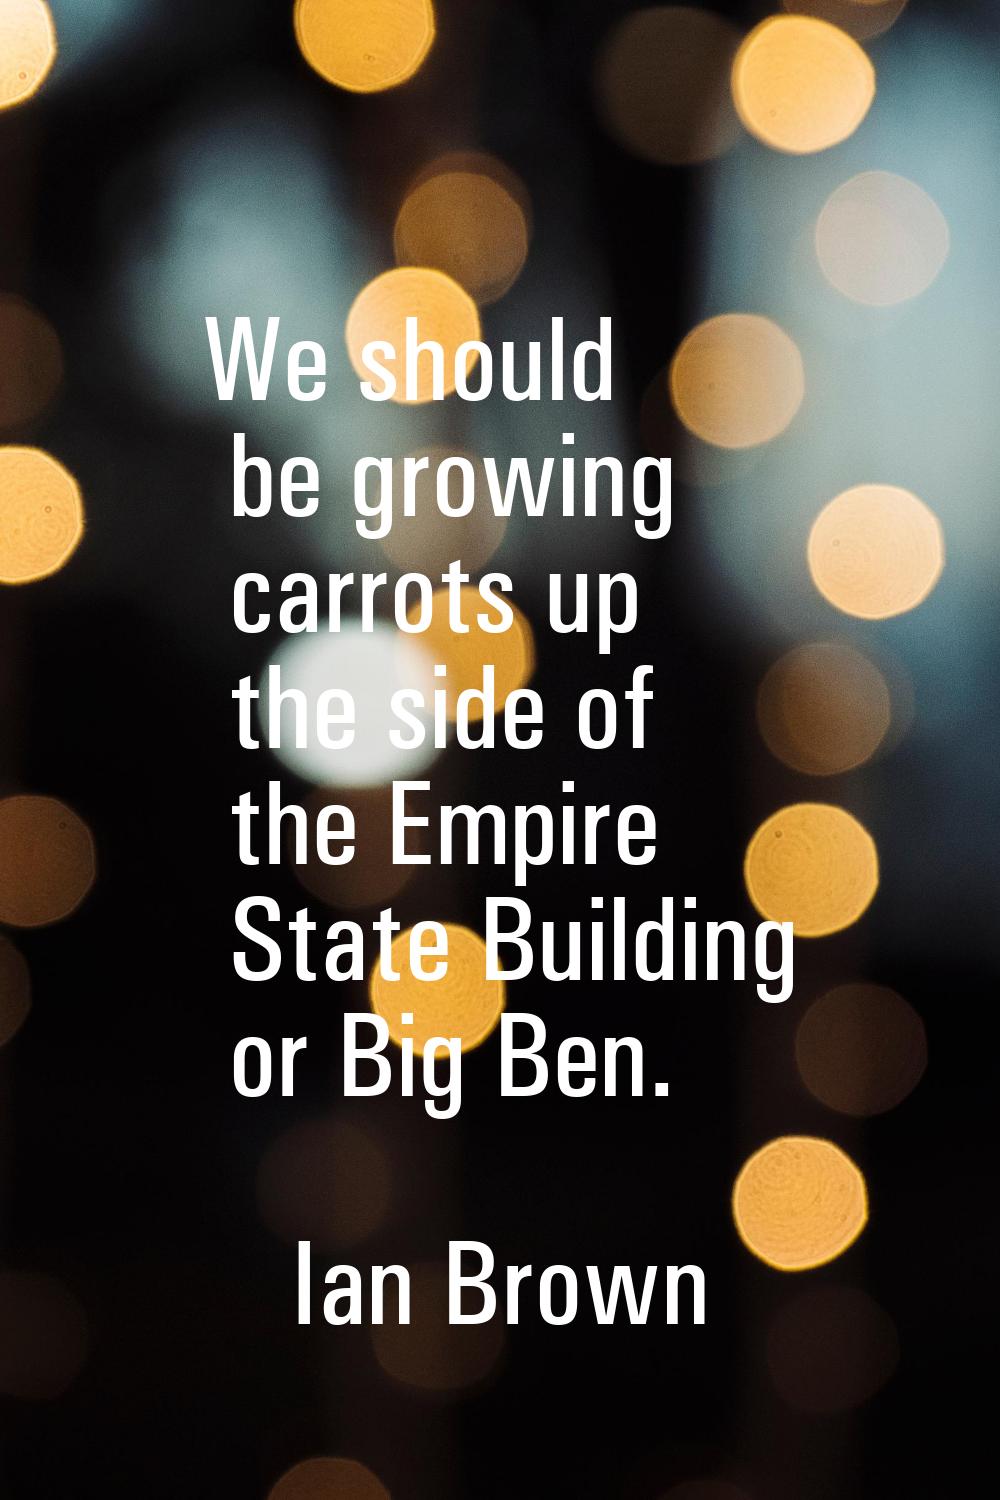 We should be growing carrots up the side of the Empire State Building or Big Ben.